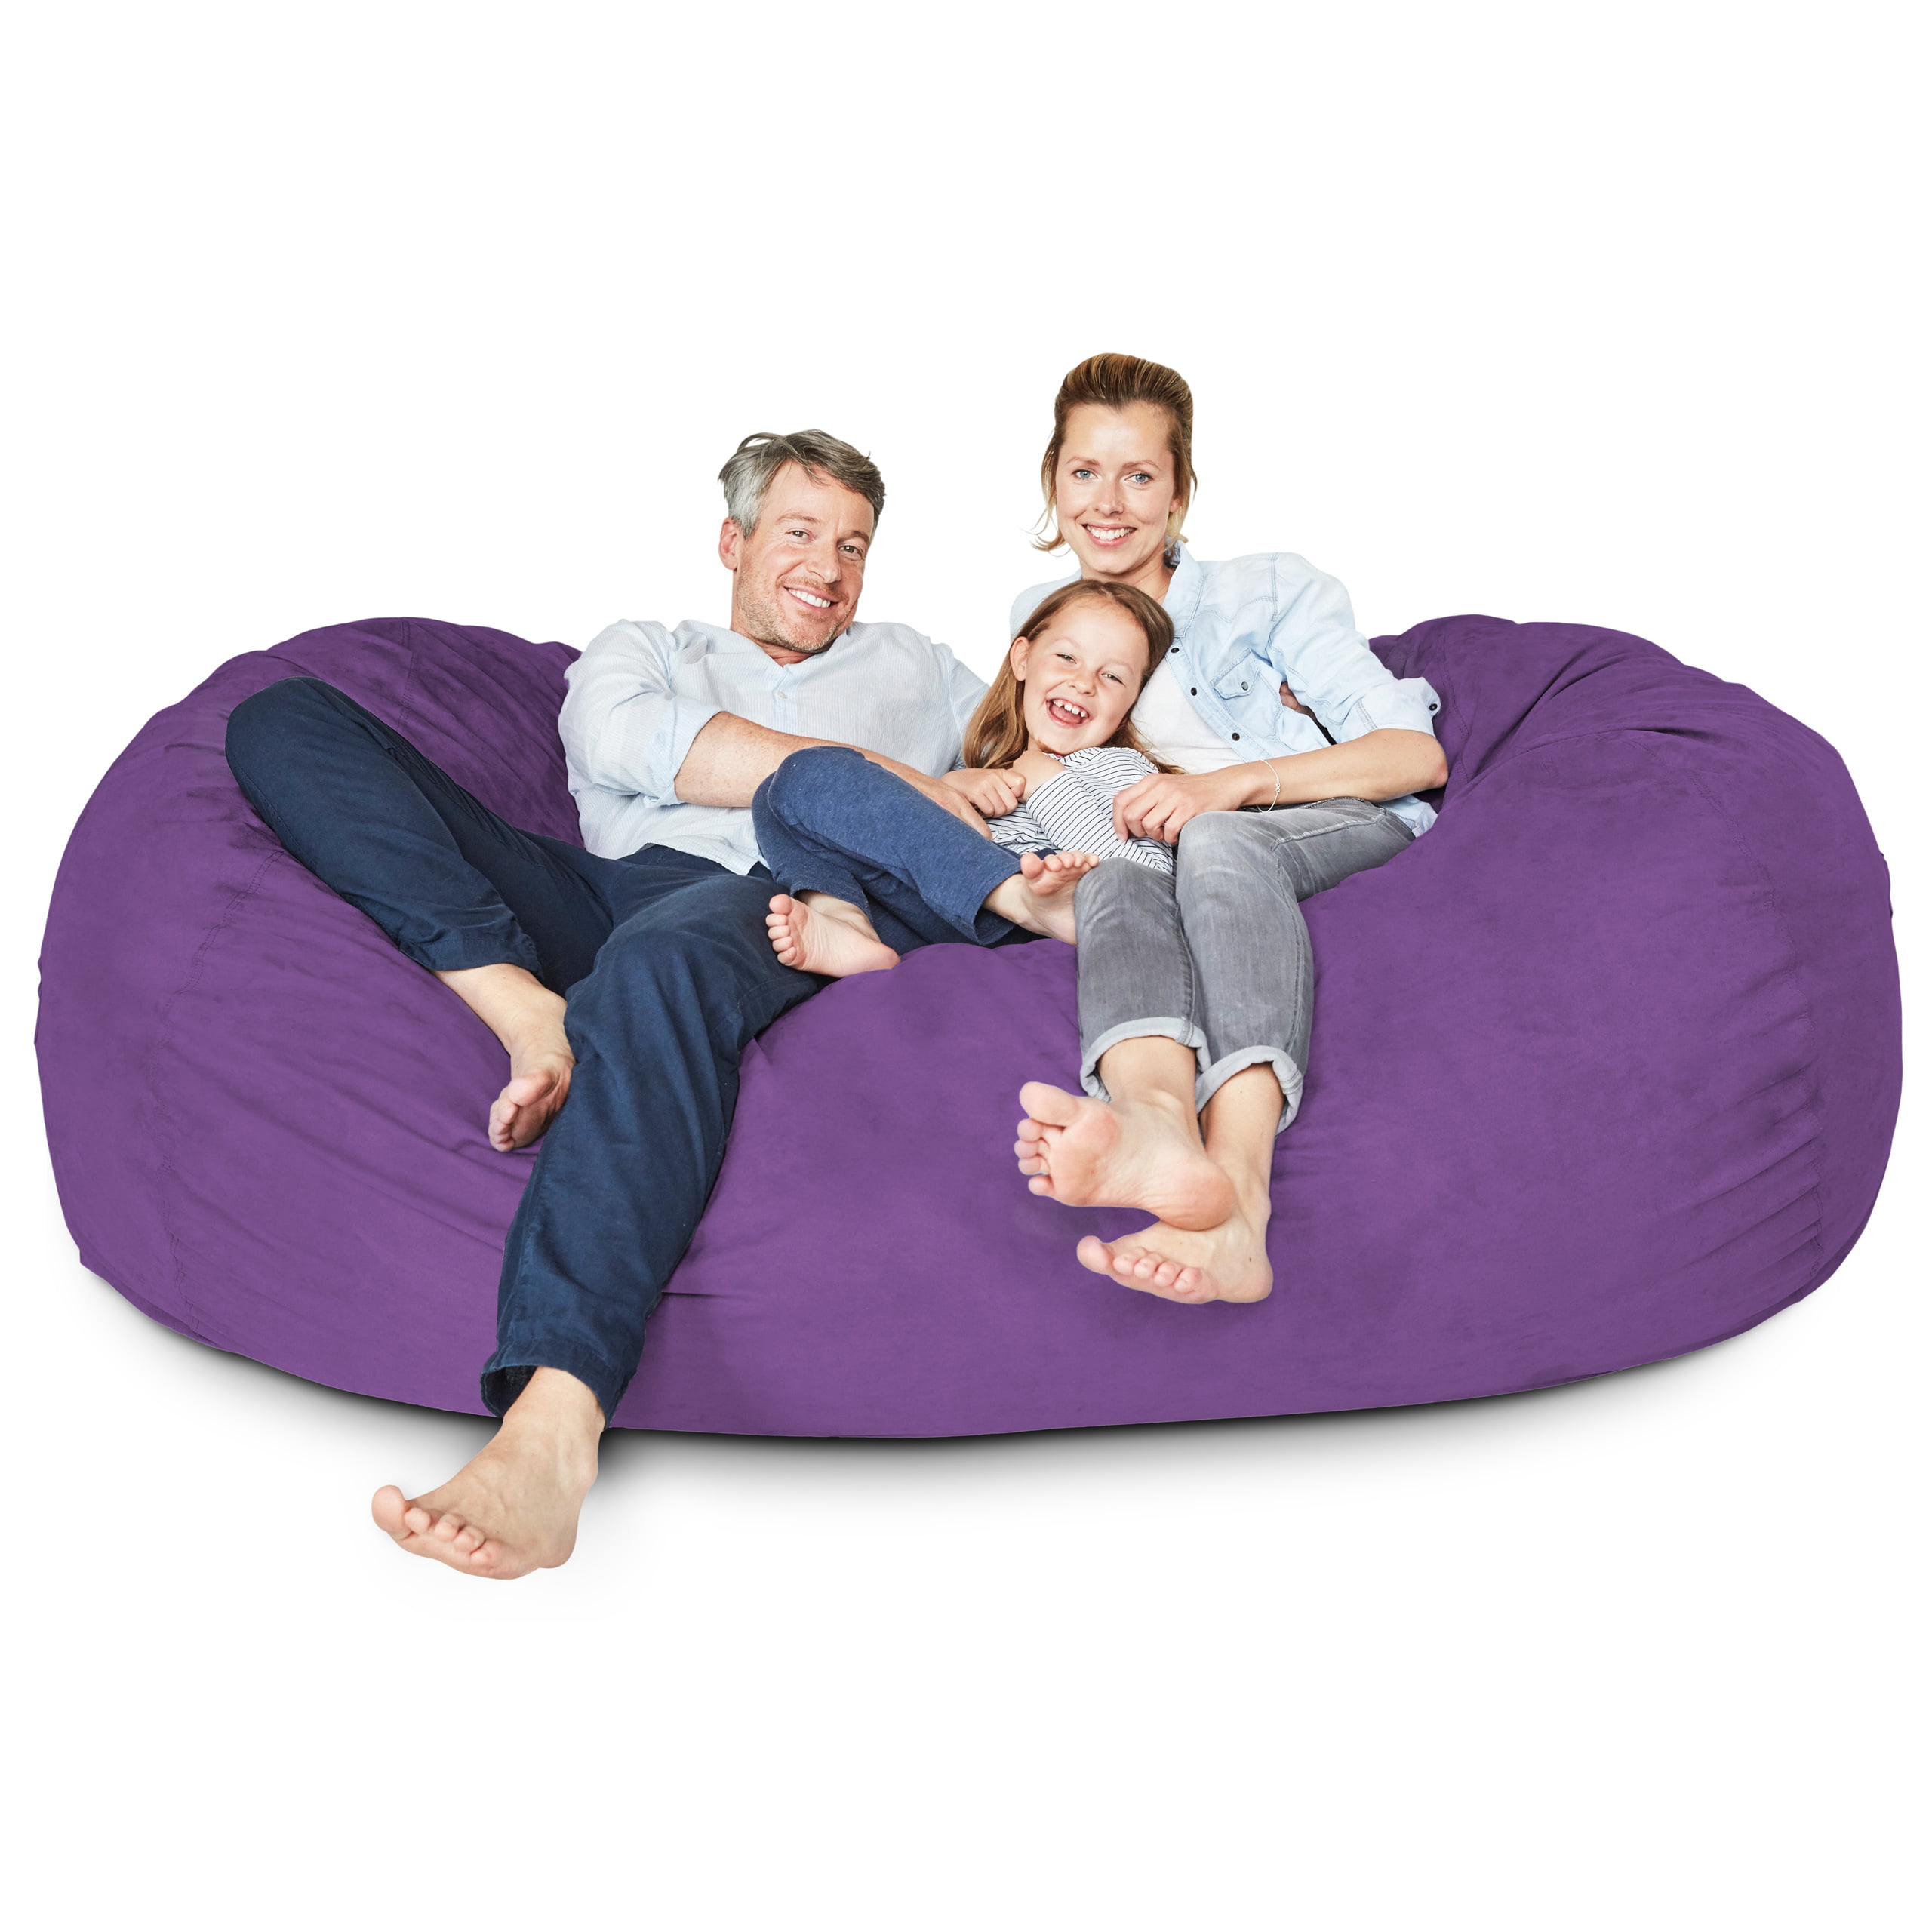 Lumaland Luxury 7-Foot Bean Bag Chair with Microsuede Cover Purple ...